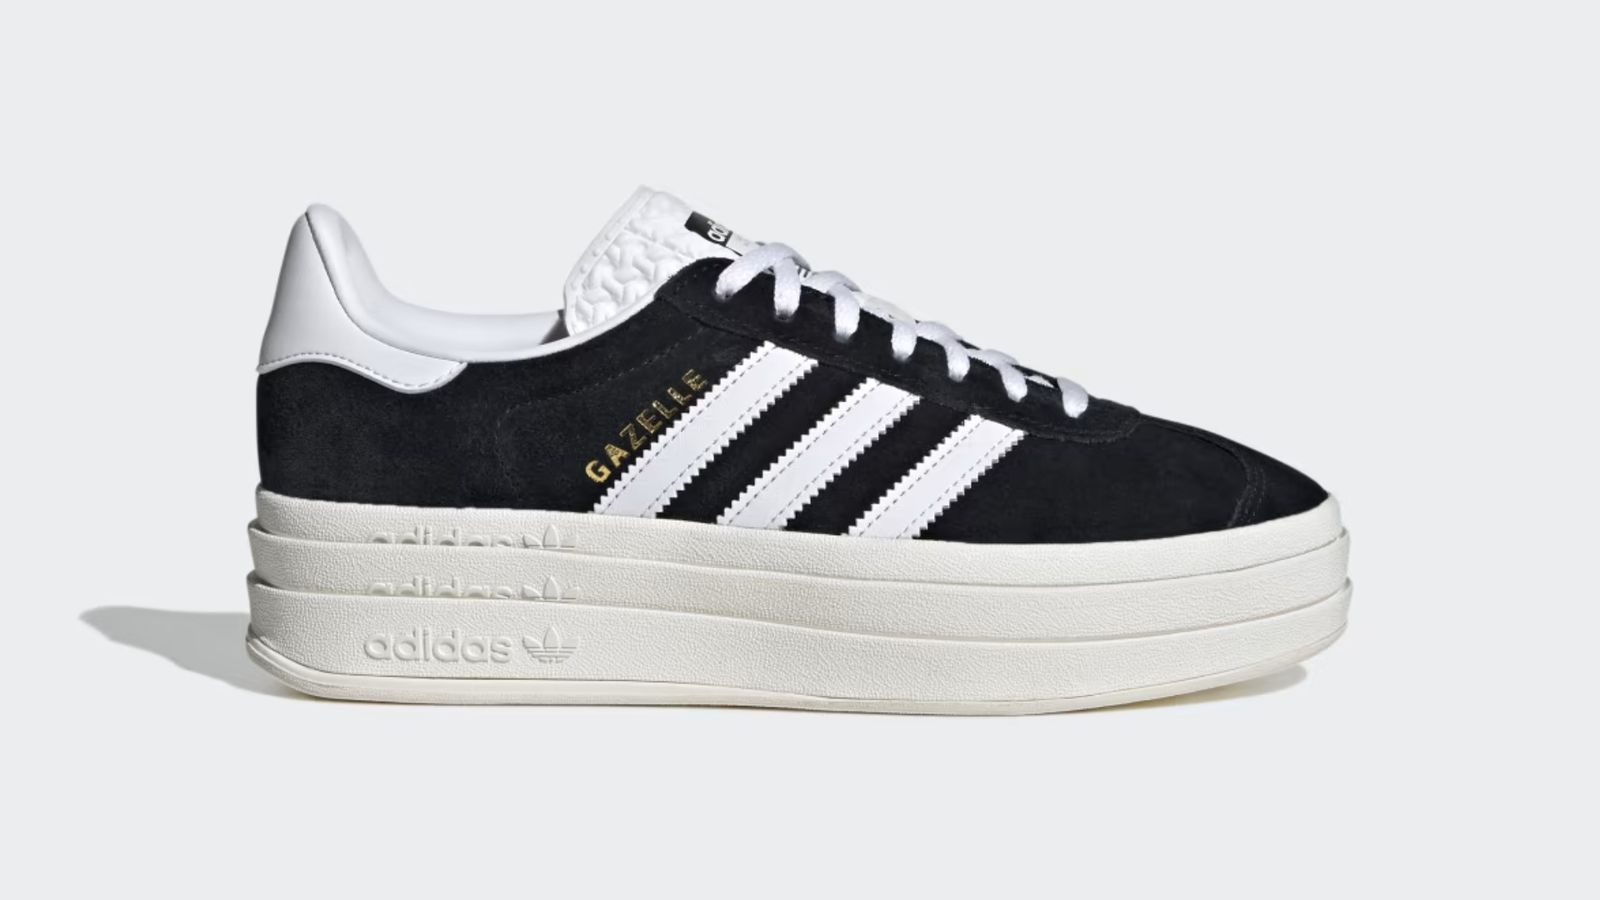 adidas Gazelle Bold "Core Black" product image of a black low-top featuring a white heel, laces, and side-stripes, plus a triple-stacked sole.